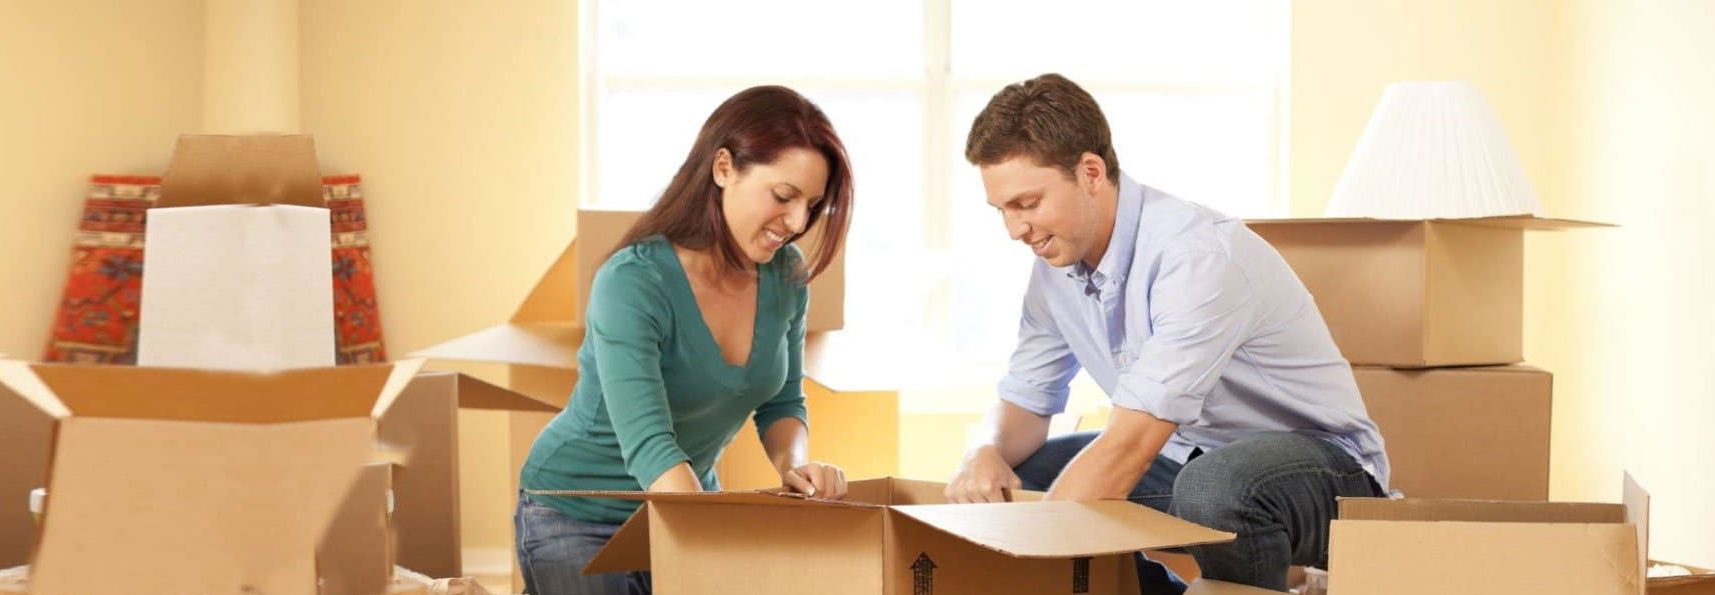 Smiling Couple Unpacking Boxes After Moving — Caloundra Removals & Storage in Sunshine Coast, QLD